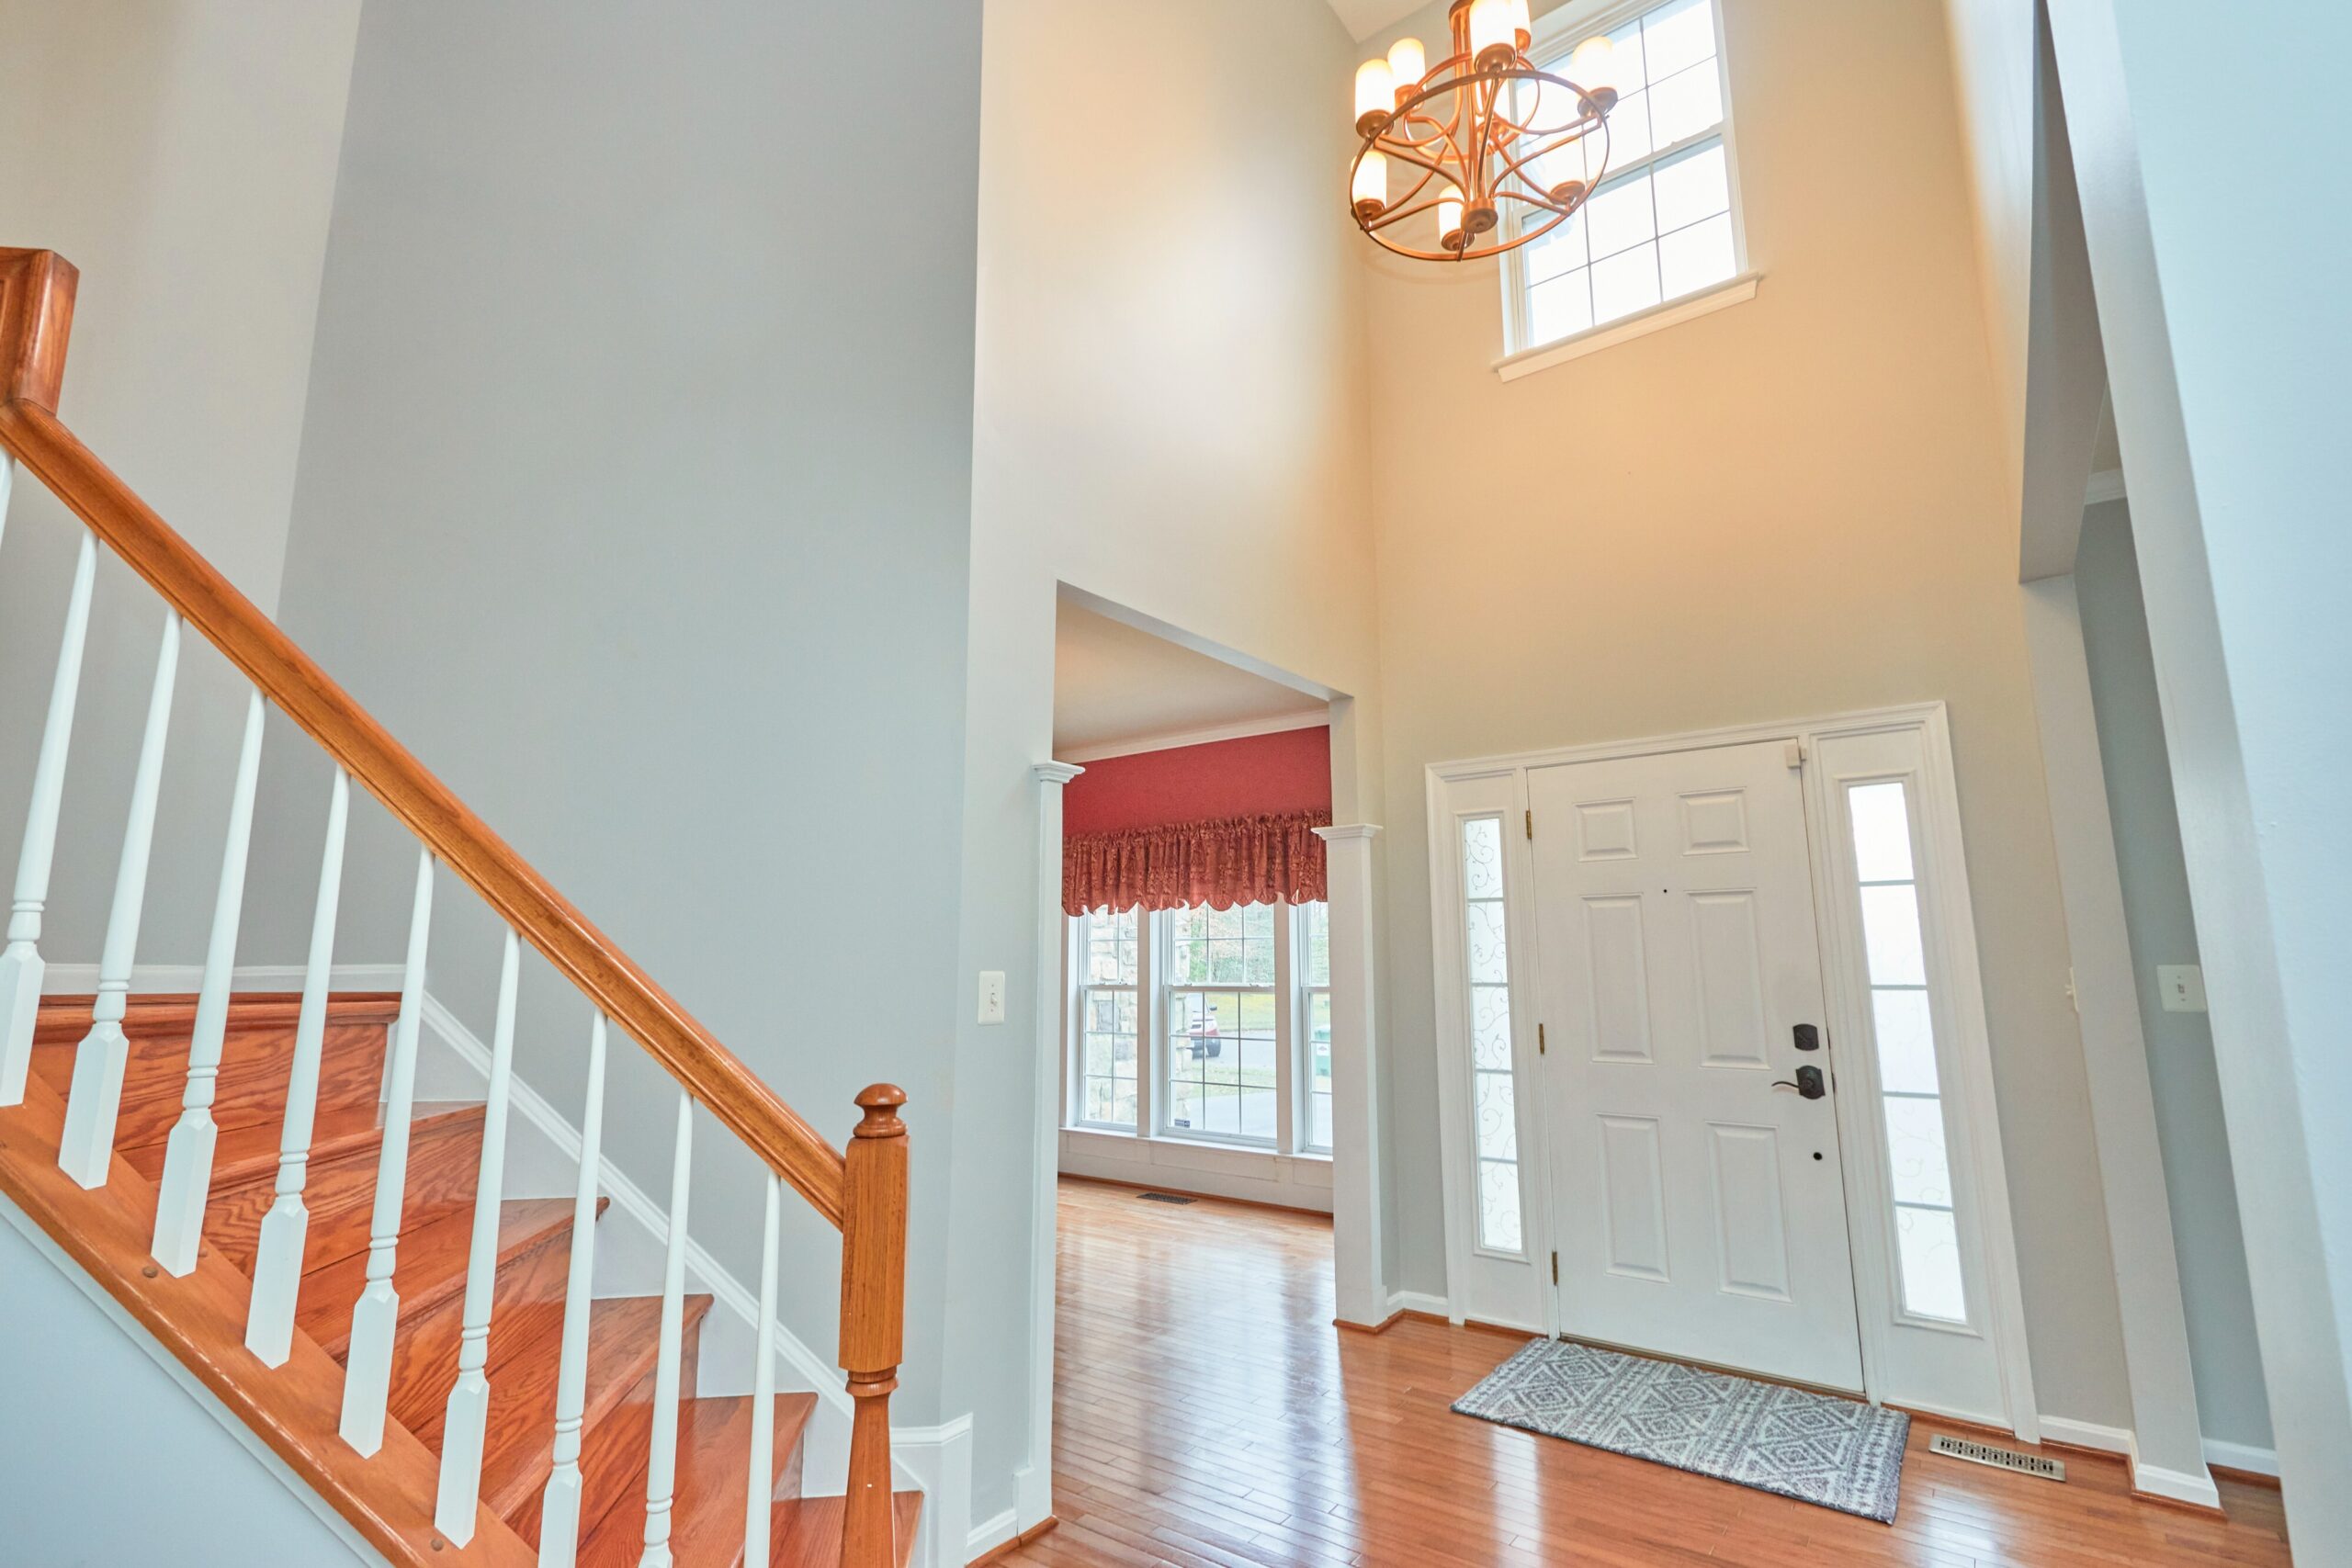 Professional interior photo of 80 Brentsmill Drive in Stafford, Virginia - showing the front 2-story entry with staircase on the left and chandelier